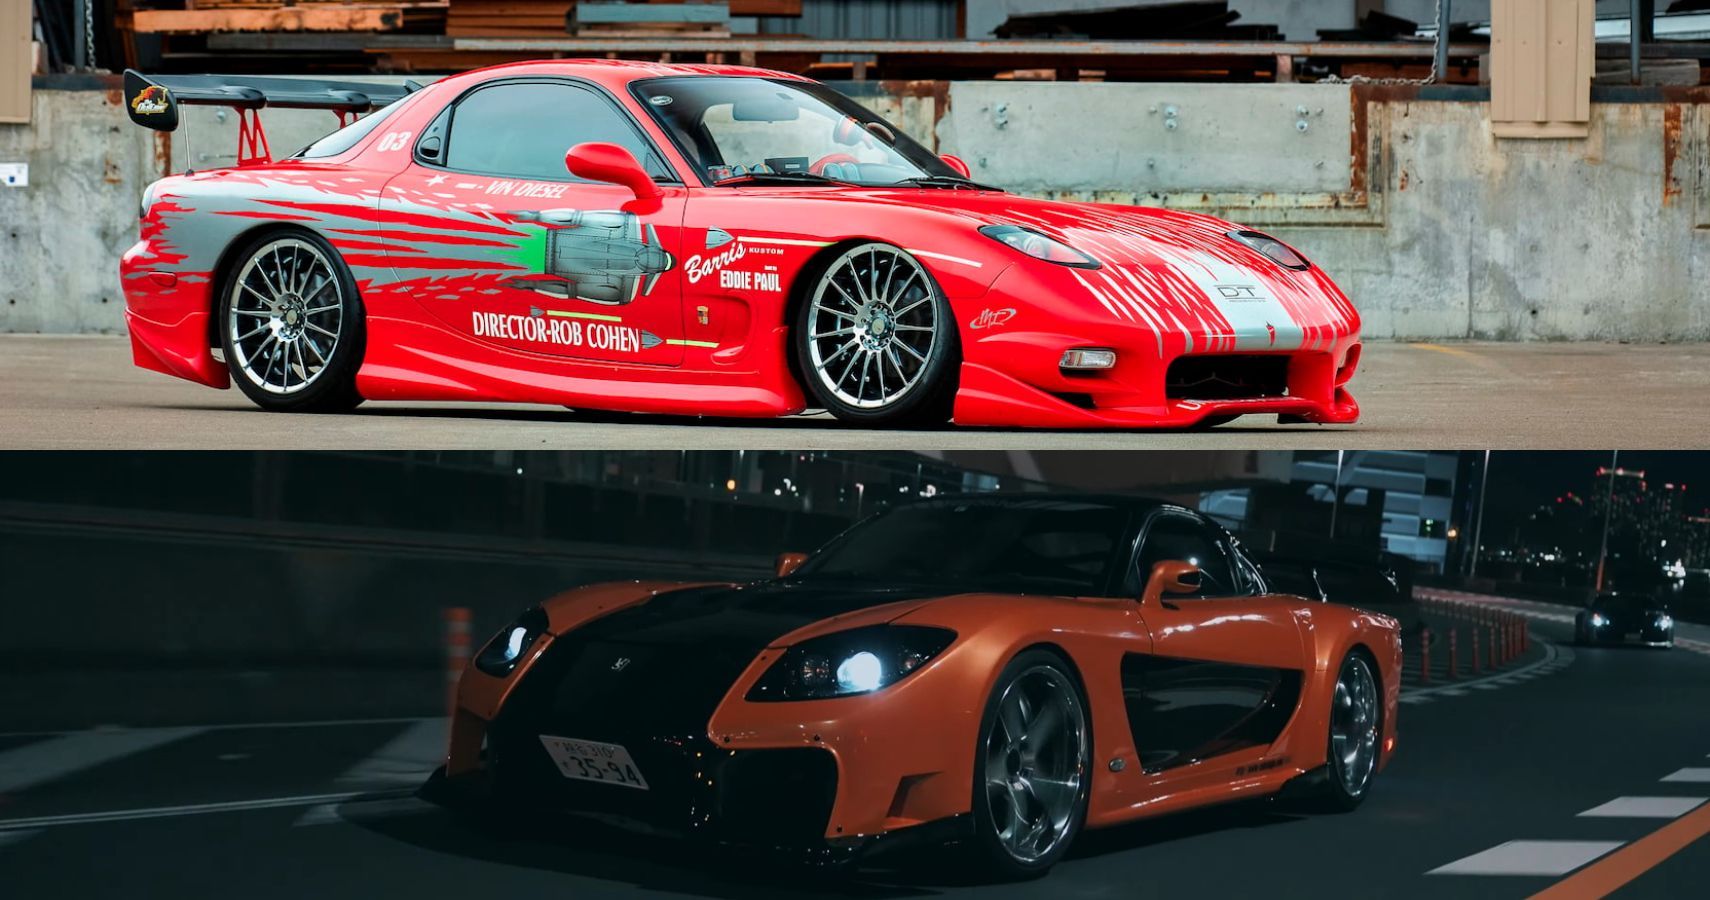 Mazda RX-7 cars from Fast and Furious Movies